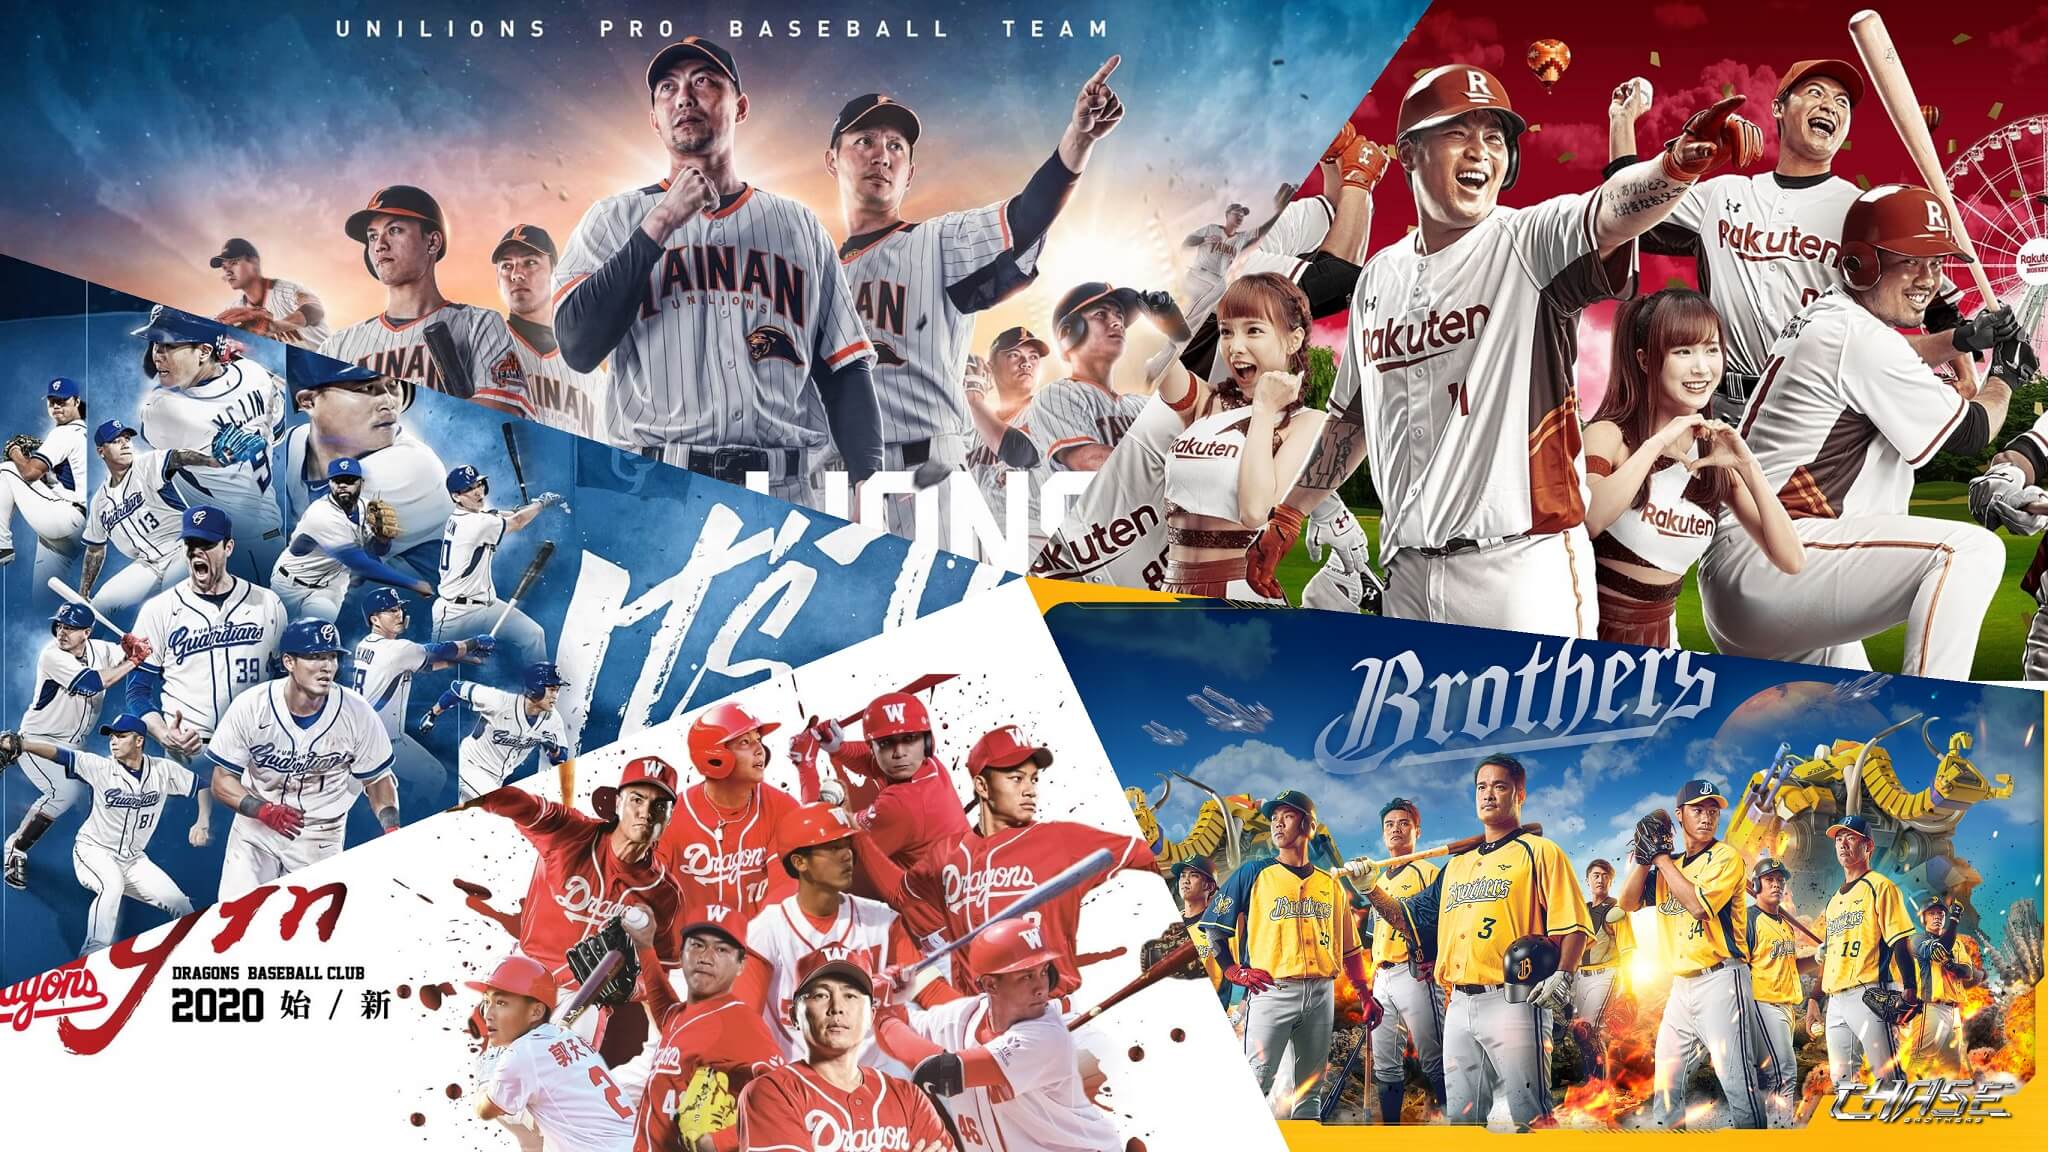 2020 CPBL Team Visuals and Slogans